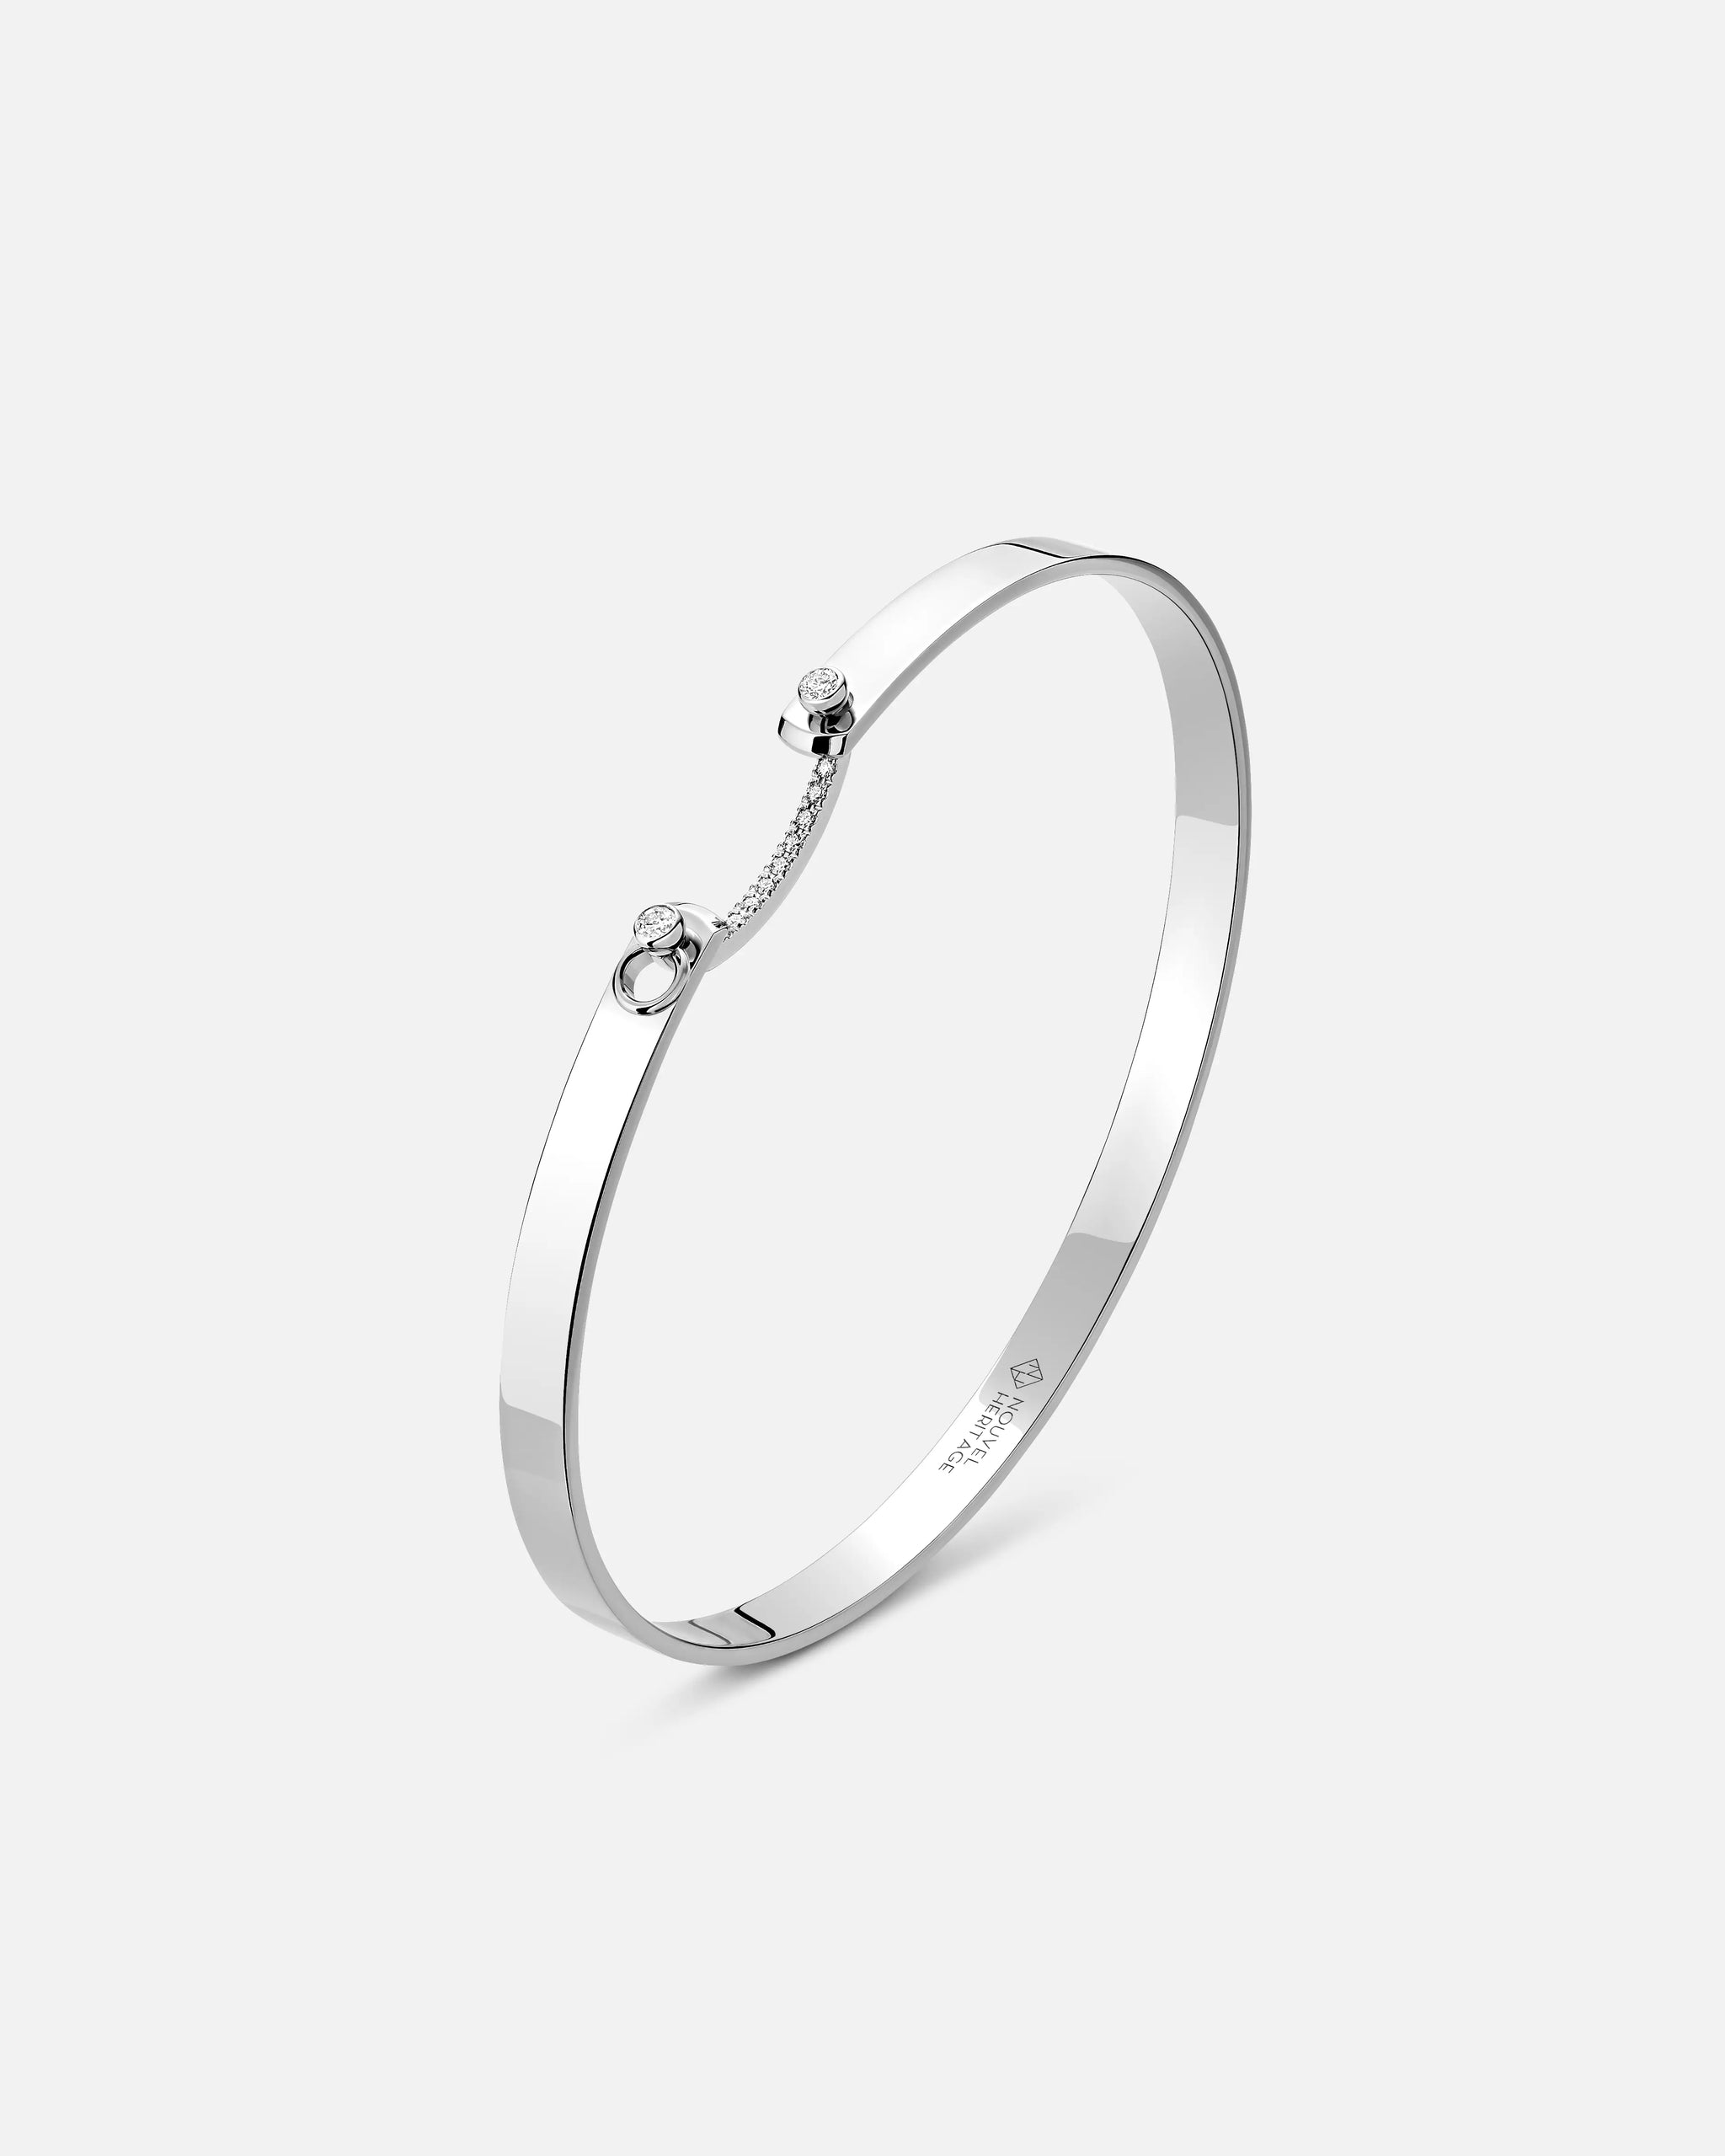 Business Meeting Mood Bangle in White Gold - 1 - Nouvel Heritage